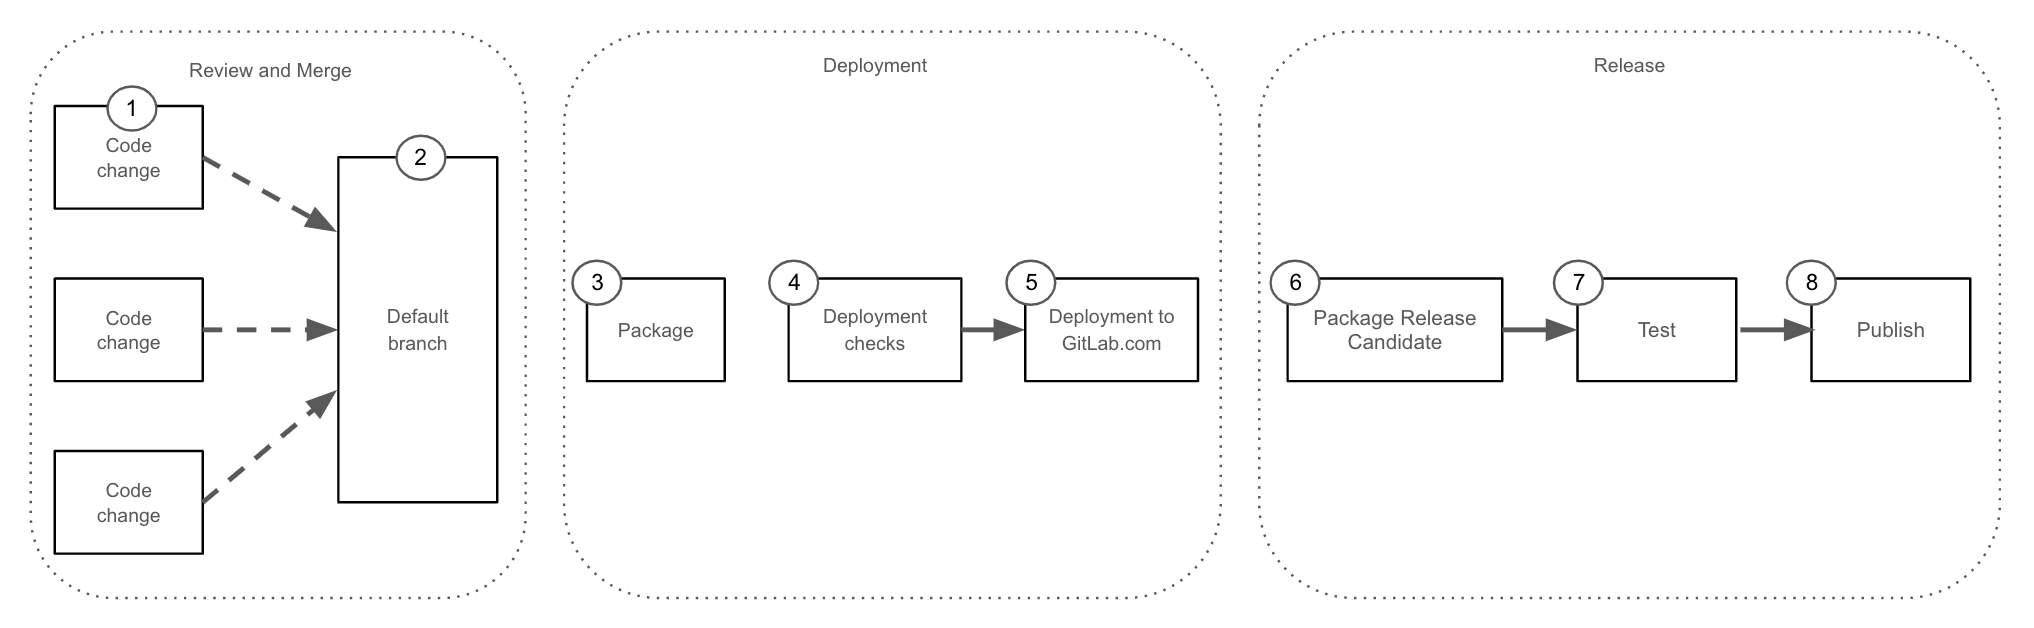 Deployment and Release process overview